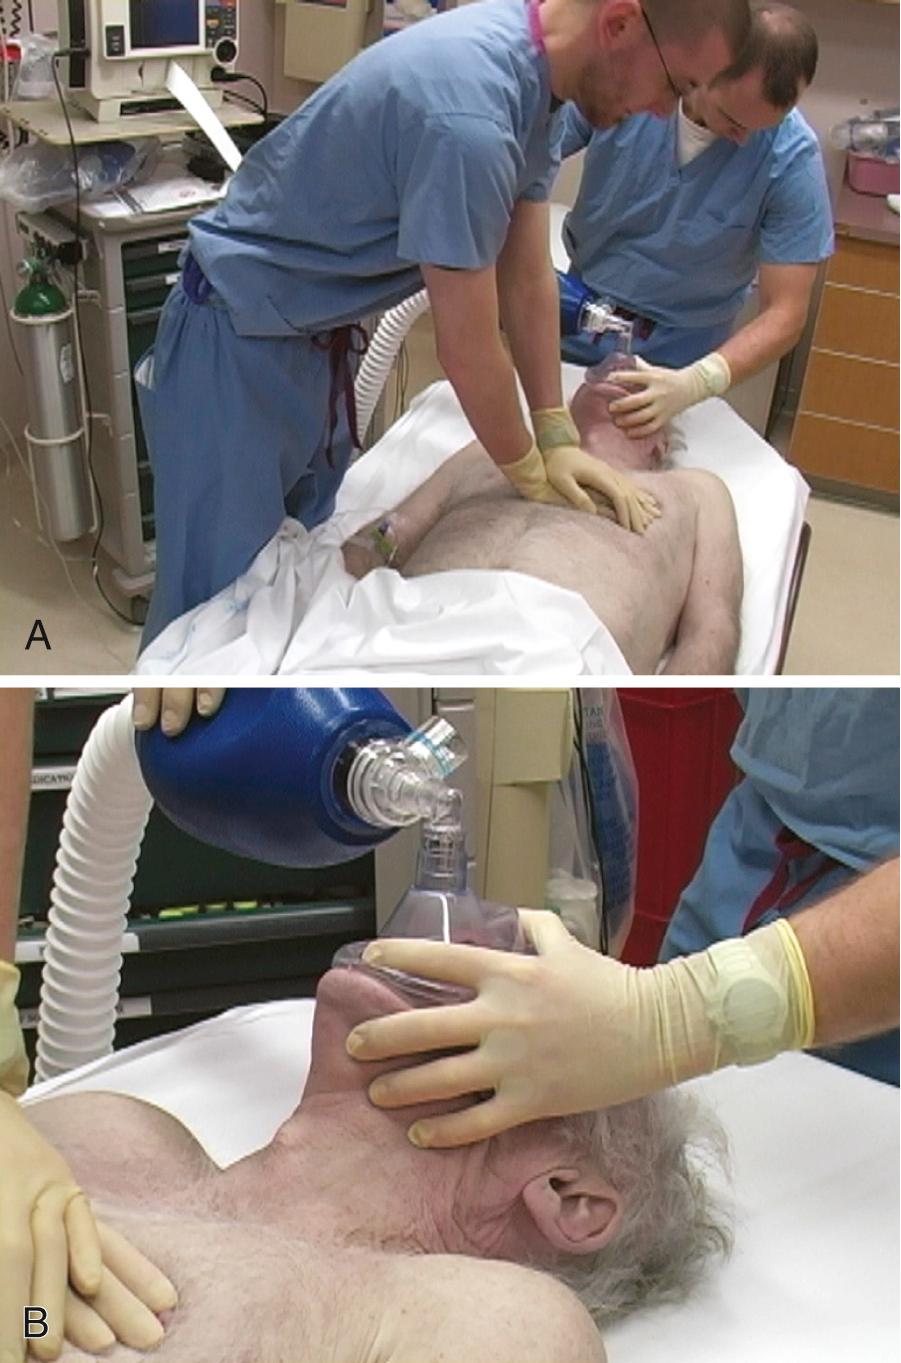 Figure 17.1, Conventional cardiopulmonary resuscitation (CPR). Note : no alternative technique or device in routine use has consistently been shown to be superior to conventional CPR. A, Compress the sternum to a depth between 2.0 and 2.4 inches at a rate between 100 and 120 compressions/min. Better CPR can be achieved by having the rescuer stand on a stepstool during compressions, rotating rescuers every 2 to 3 minutes, and minimizing pauses. B, Deliver ventilations at a rate of 8 to 10 breaths/min. Avoid hyperventilation during resuscitation.